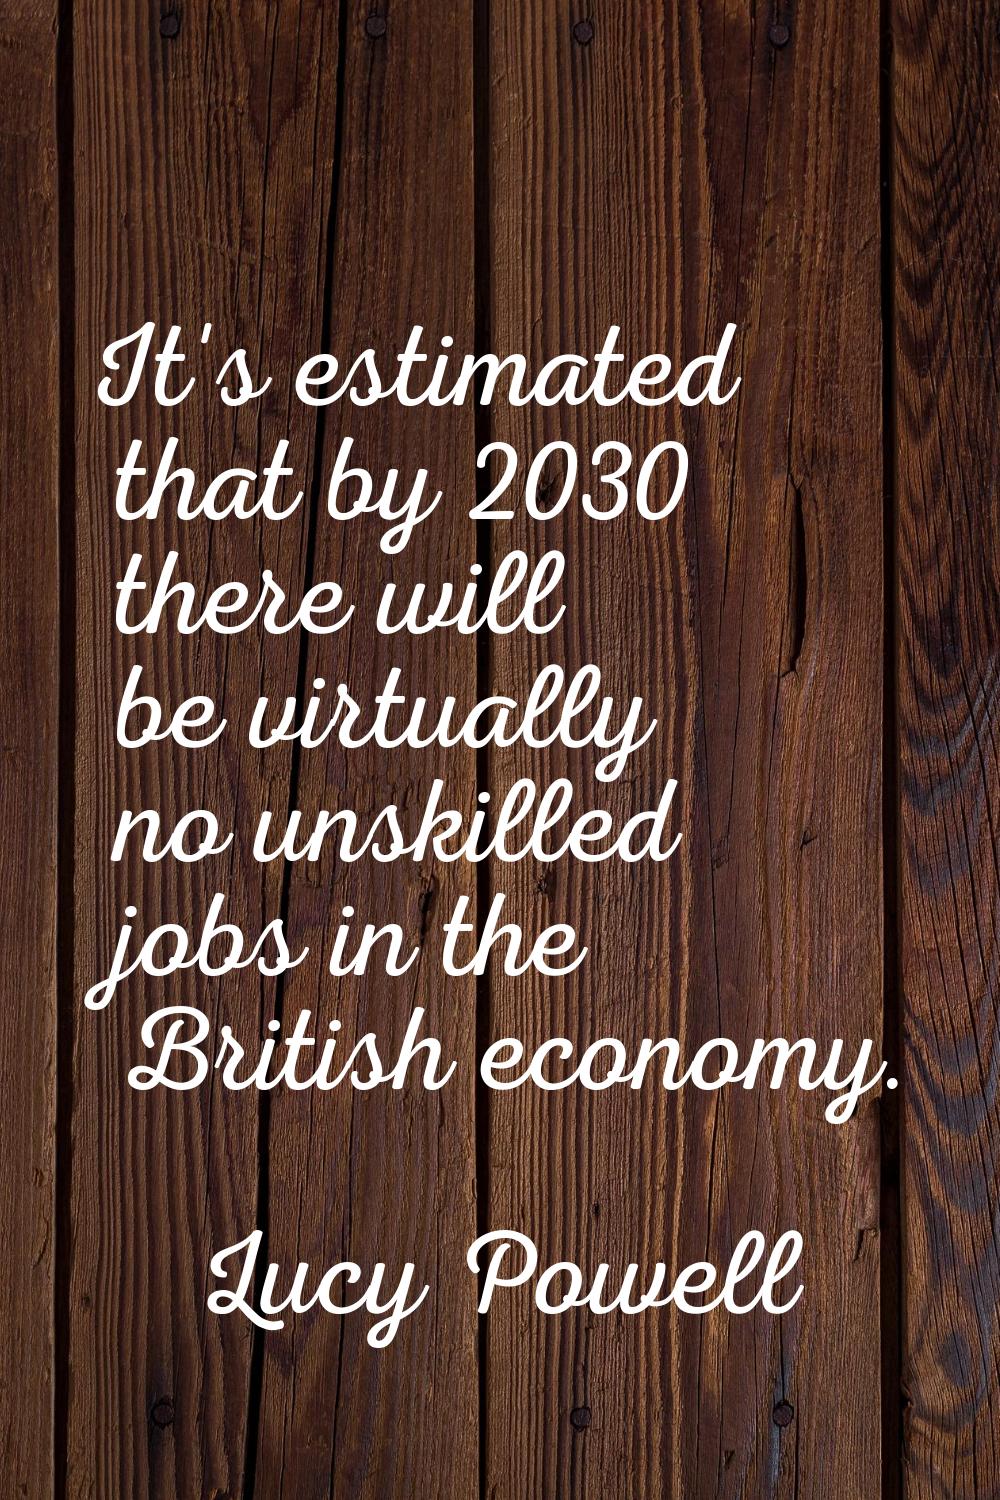 It's estimated that by 2030 there will be virtually no unskilled jobs in the British economy.